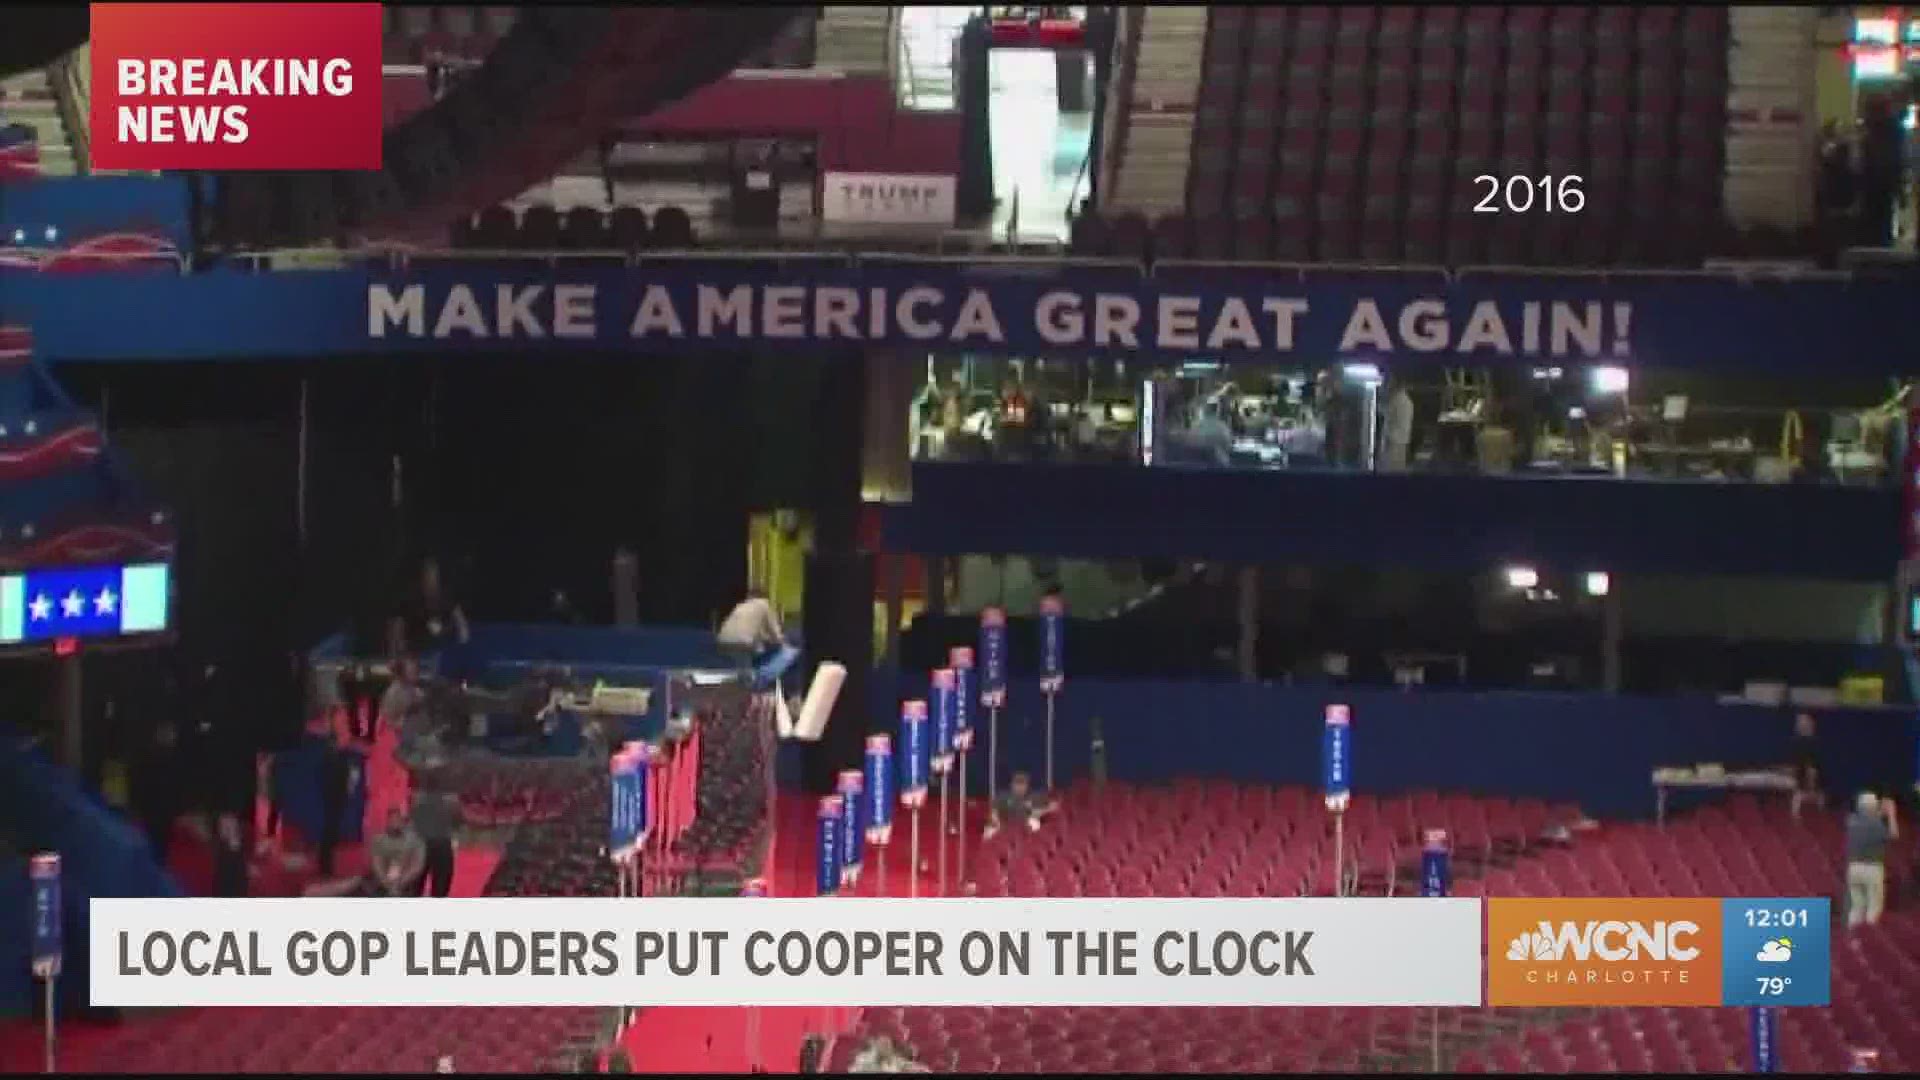 Republican leaders in the Charlotte area are putting Governor Cooper on the clock when it comes to announcing plans for the Republican National Convention.